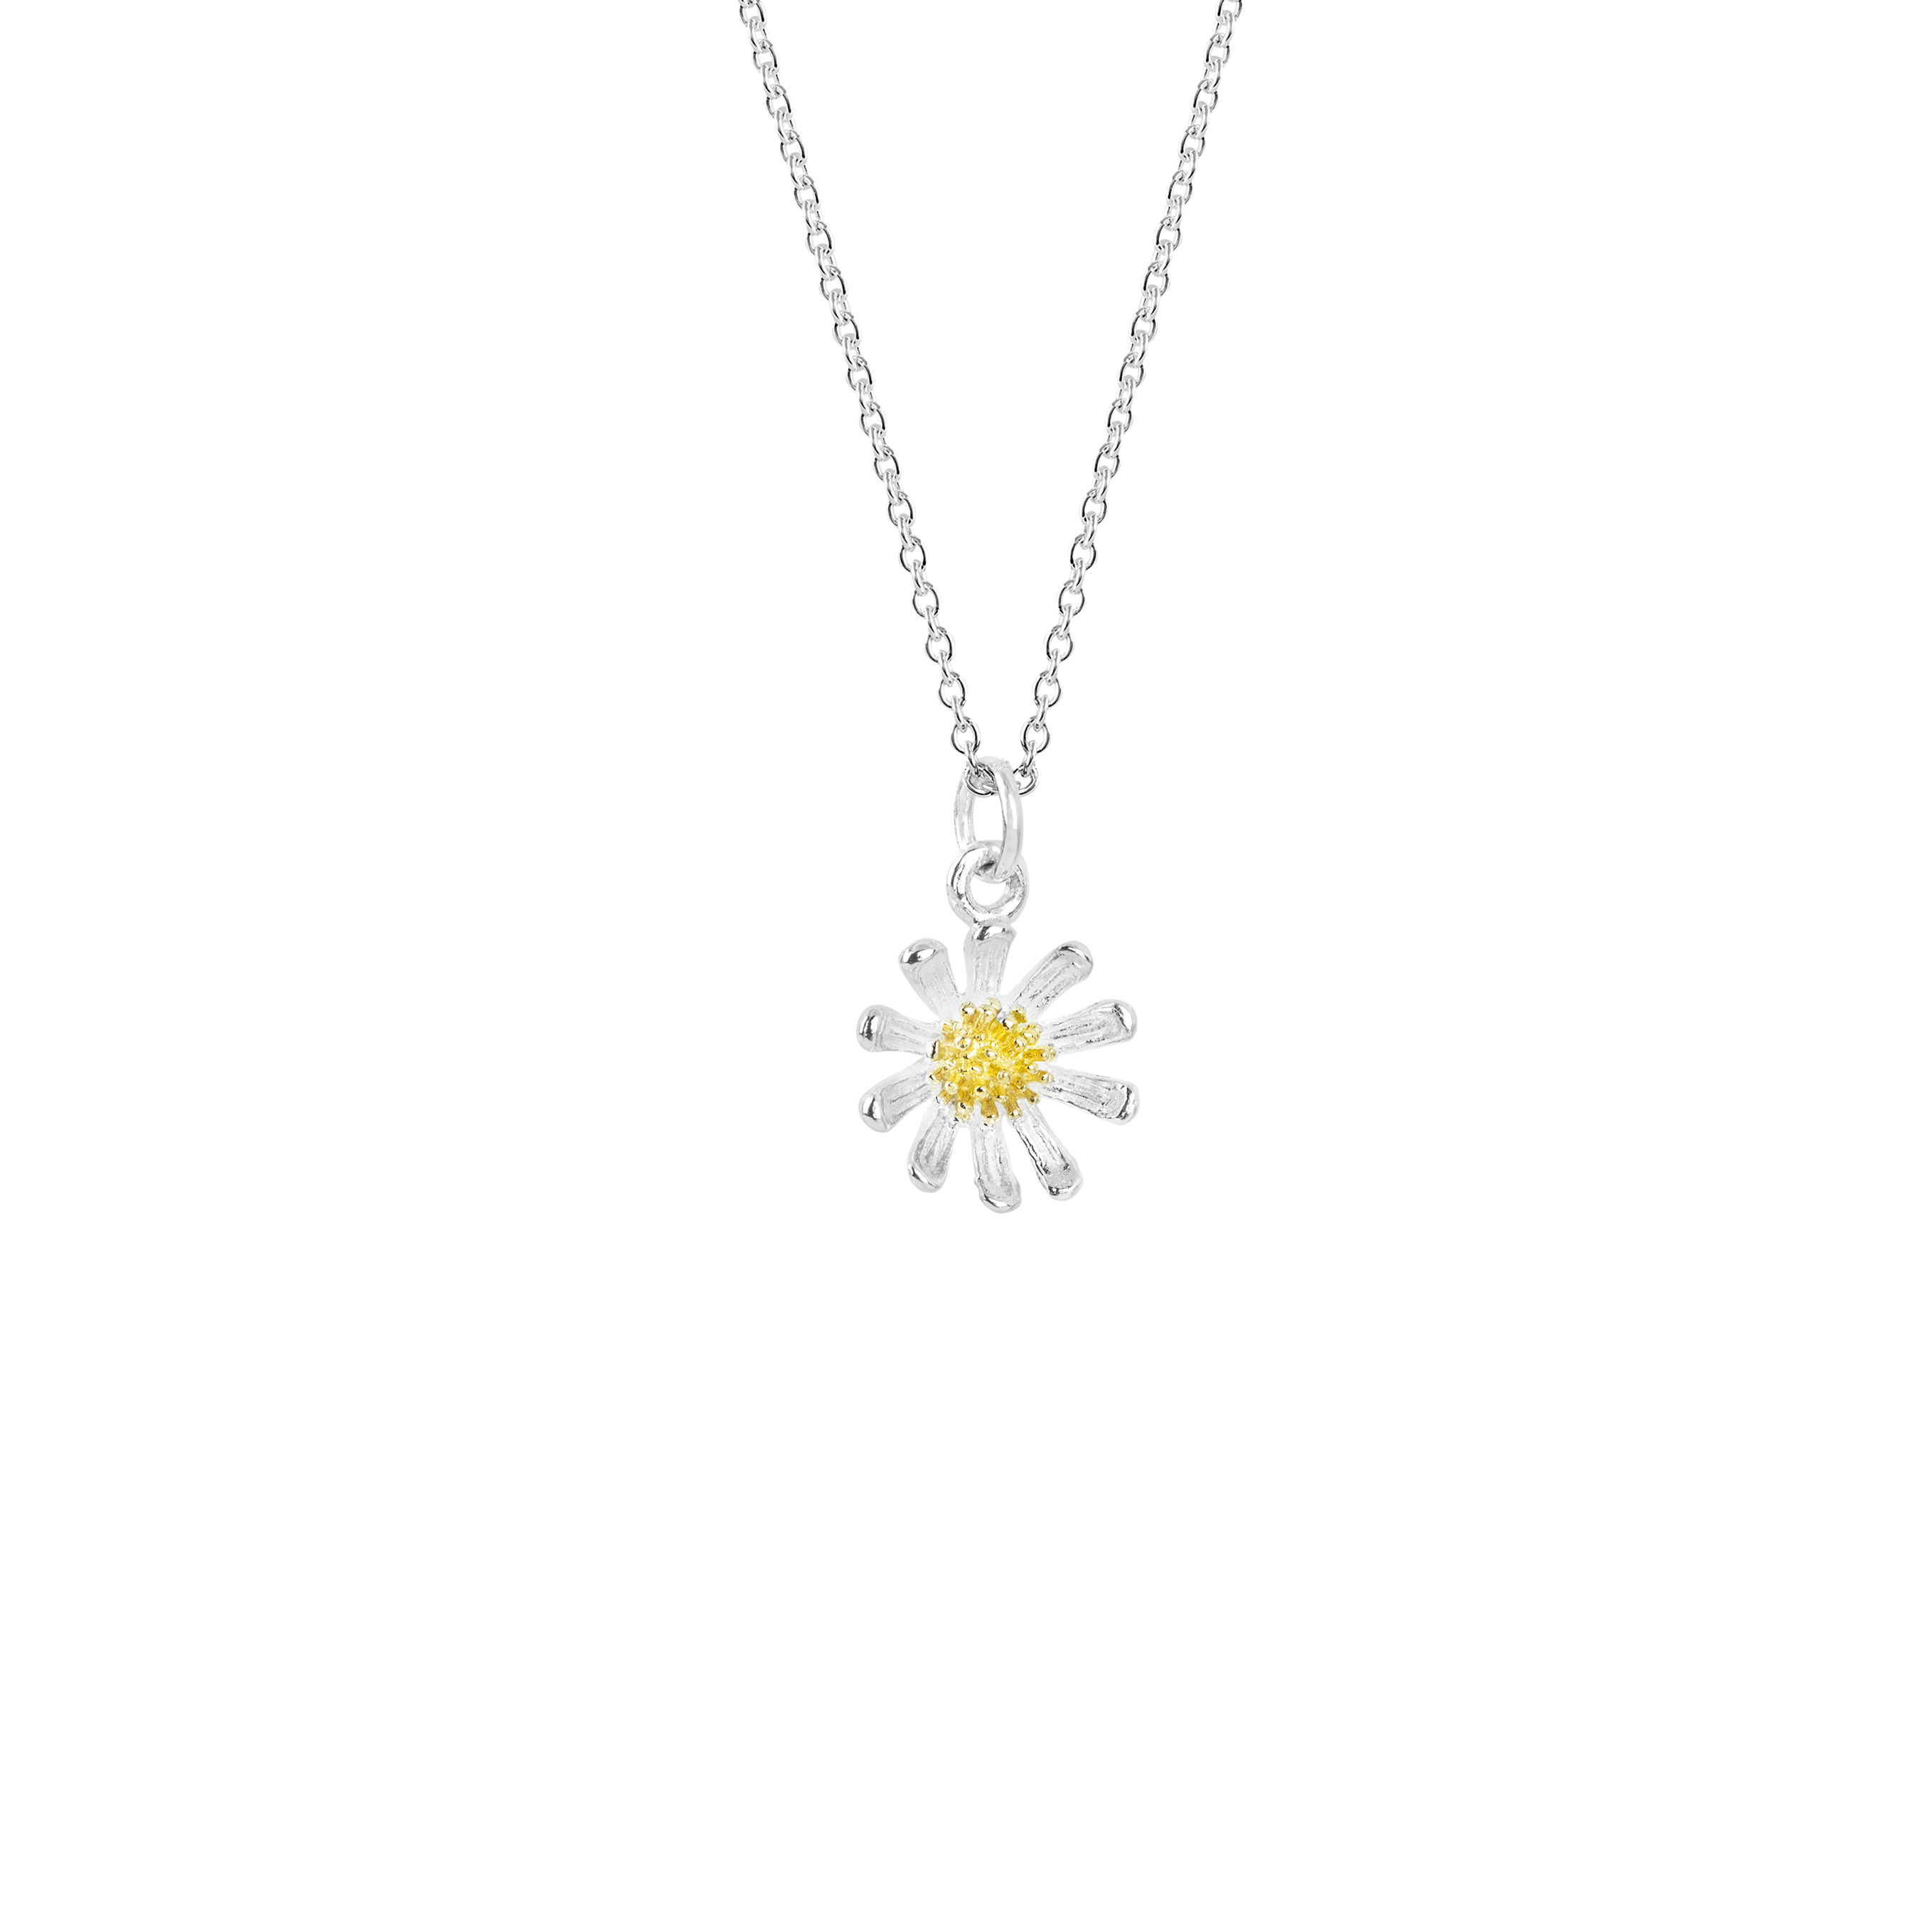 Wild Daisy Necklace, silver and gold necklace meaning friendship from Evolve Inspired Jewellery